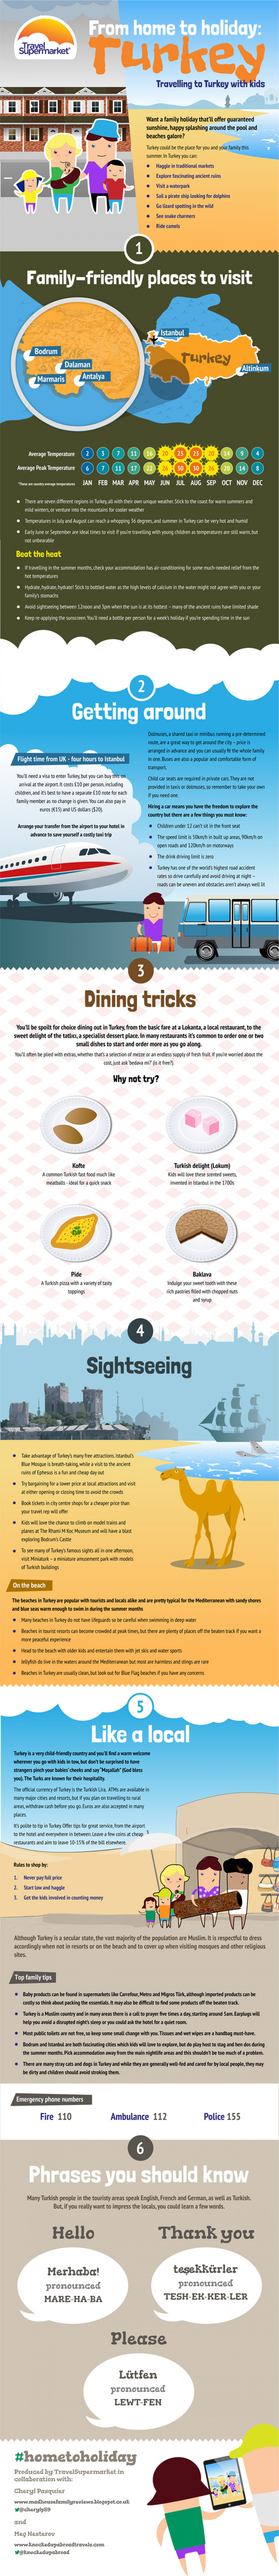 Travelling to Turkey with kids Infographic